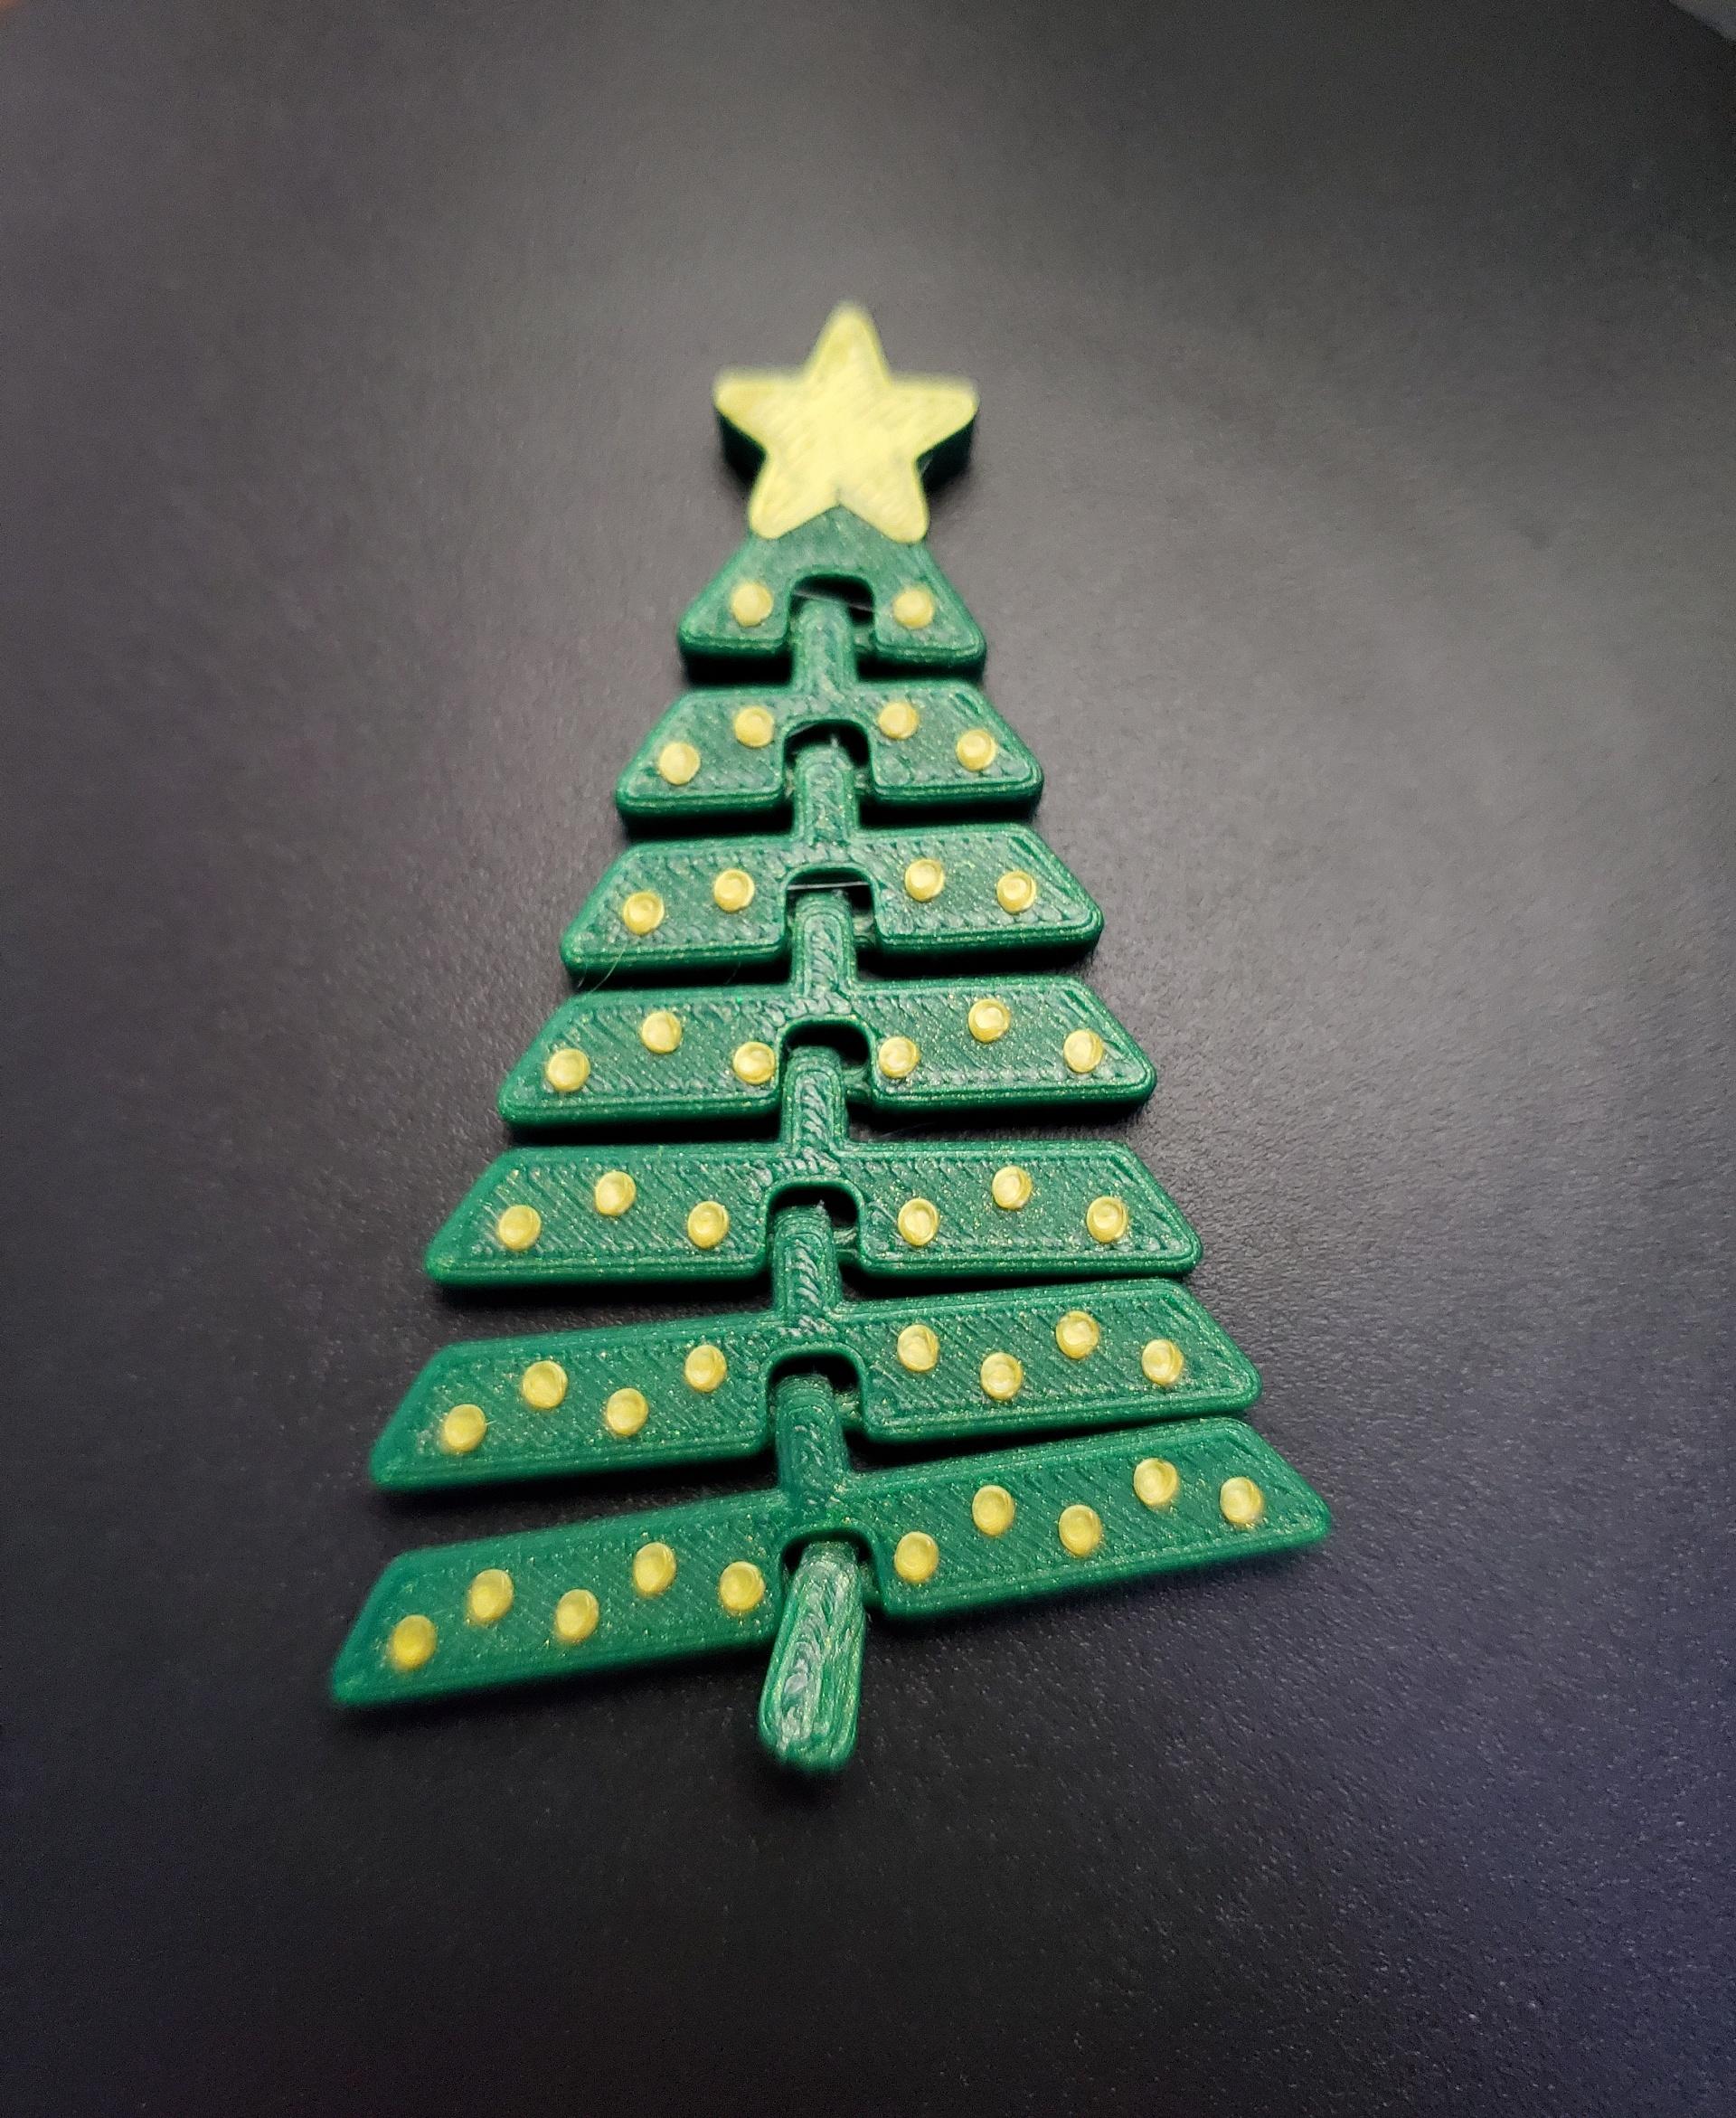 Articulated Christmas Tree with Star and Ornaments - Print in place fidget toys - 3mf - protopasta cloverfield metallic green - 3d model